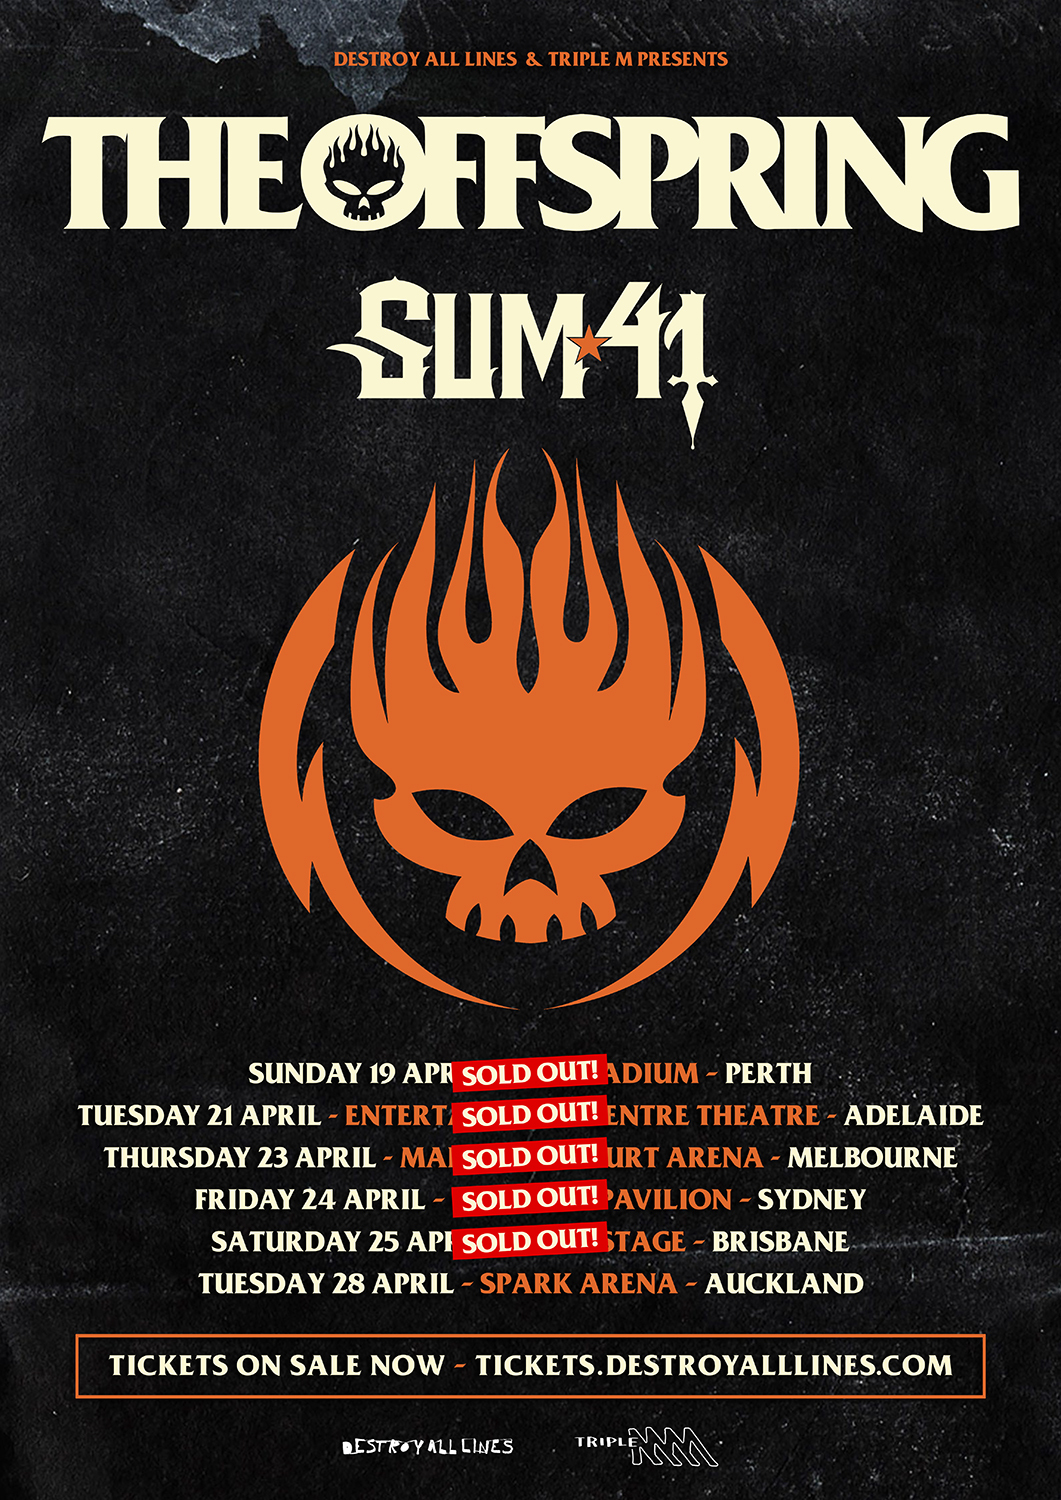 THE OFFSPRING SELL OUT NATIONAL AUSTRALIAN TOUR IN 2 HOURS!  LIMITED TICKETS STILL AVAILABLE FOR AUCKLAND